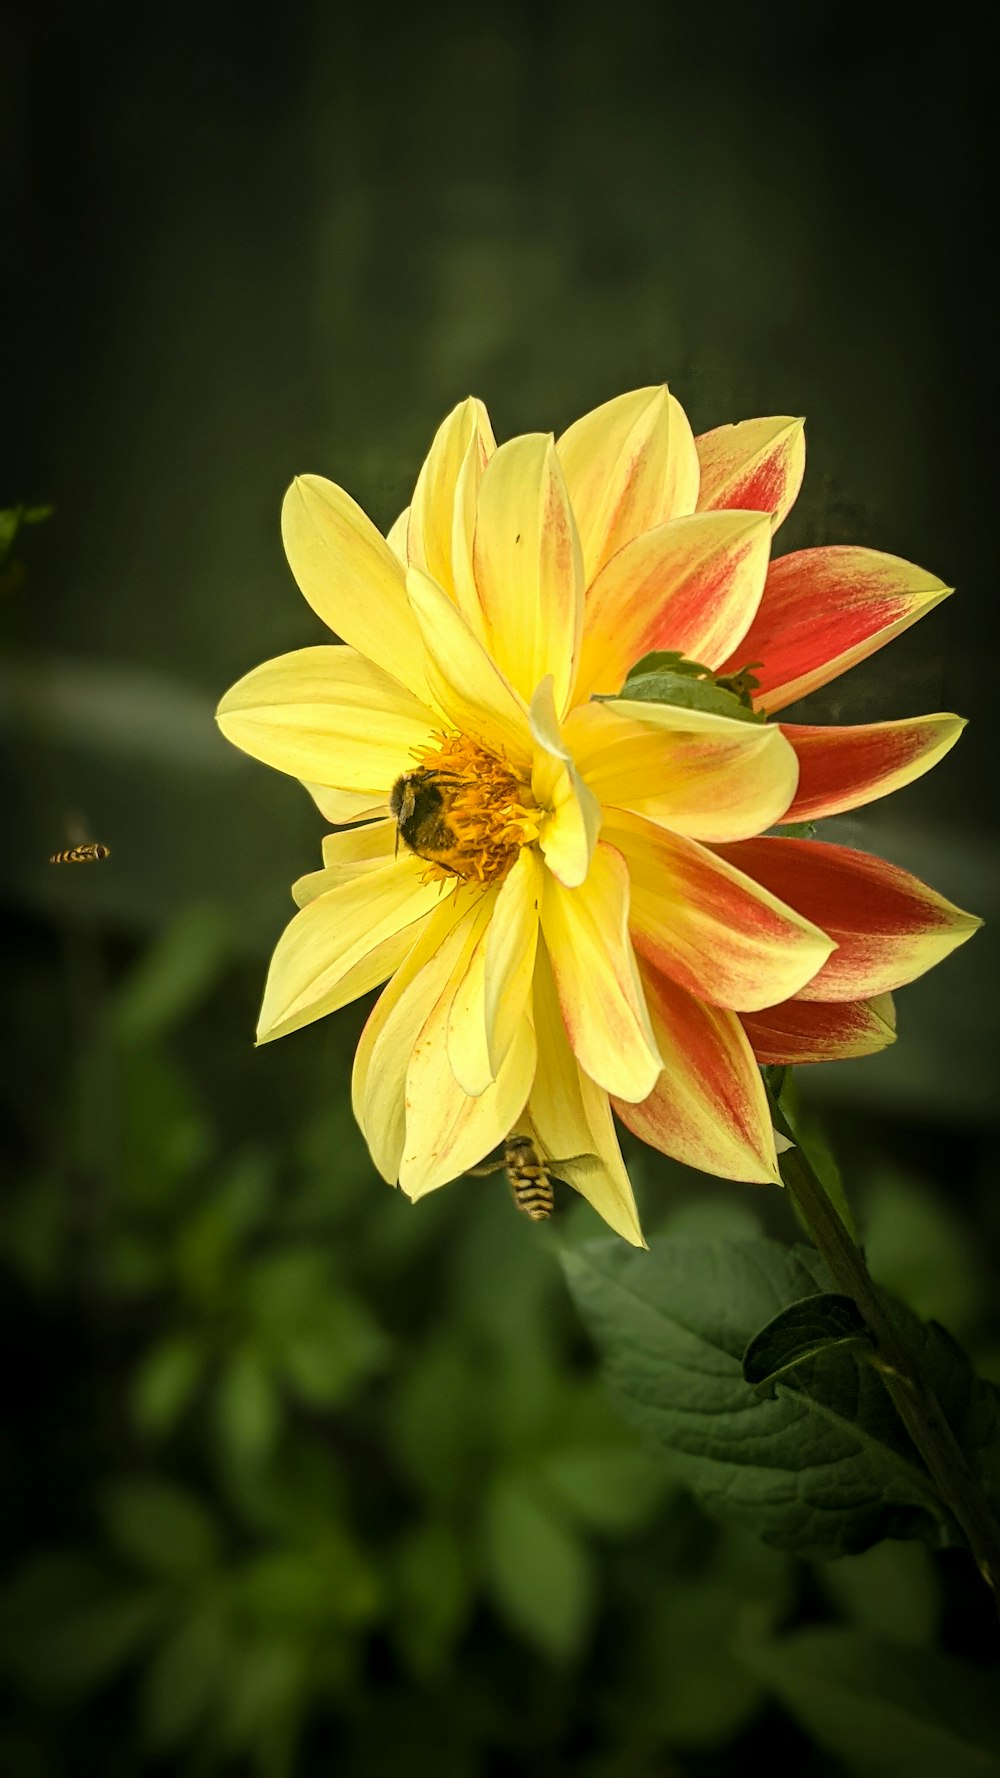 a yellow and red flower with a bee on it